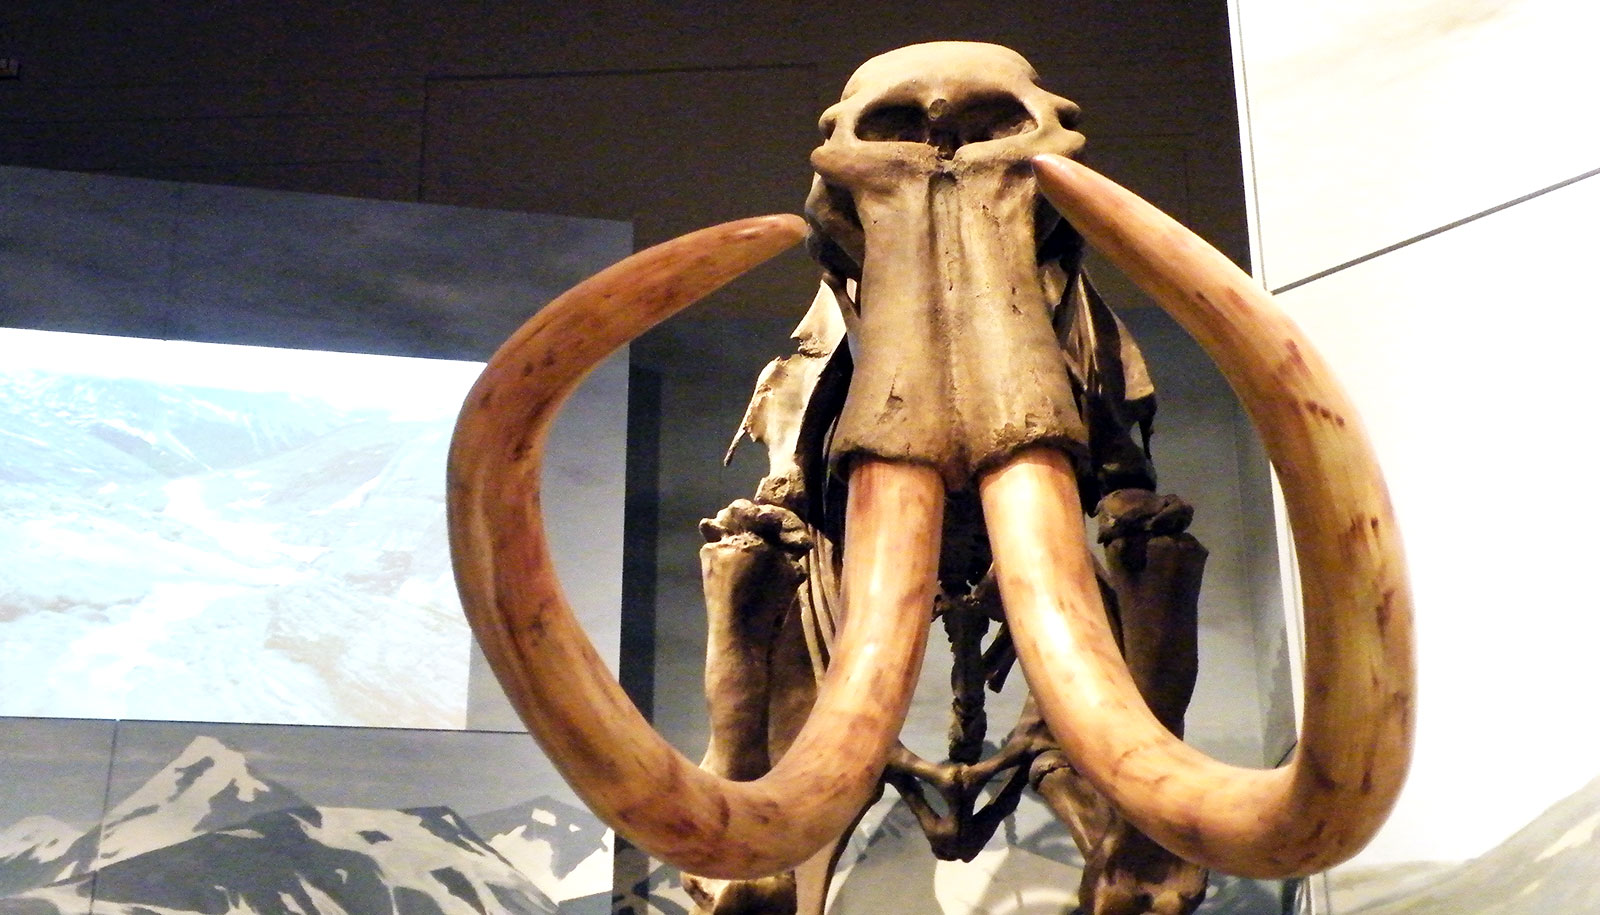 Mammoth bones hint humans were in N. America earlier than thought